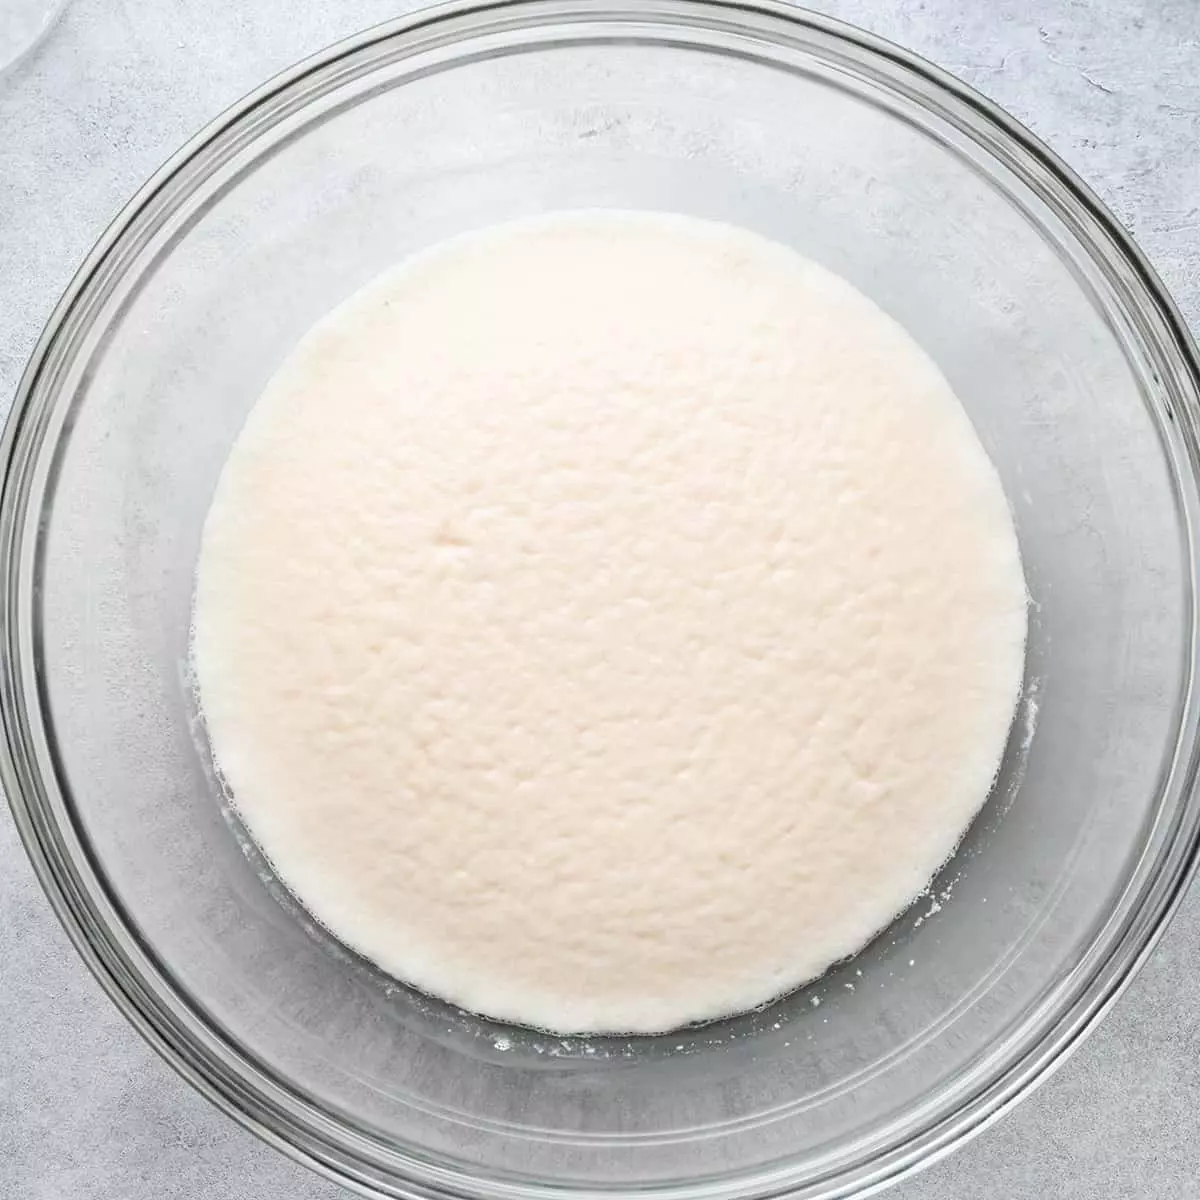 two photos showing pizza dough before and after rising in a glass bowl